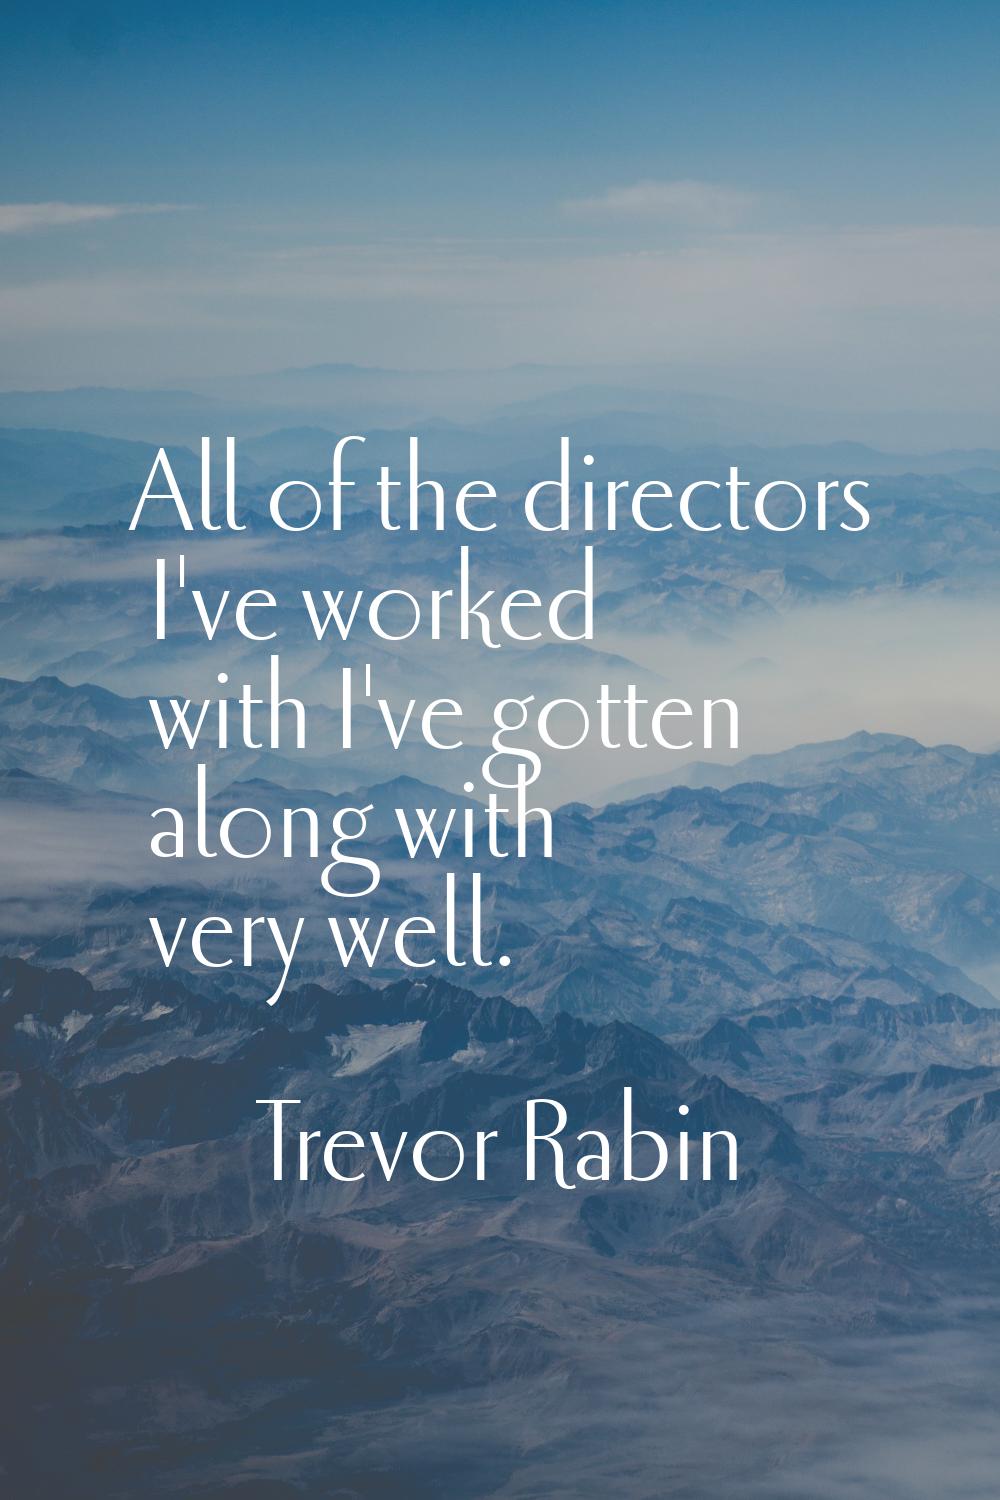 All of the directors I've worked with I've gotten along with very well.